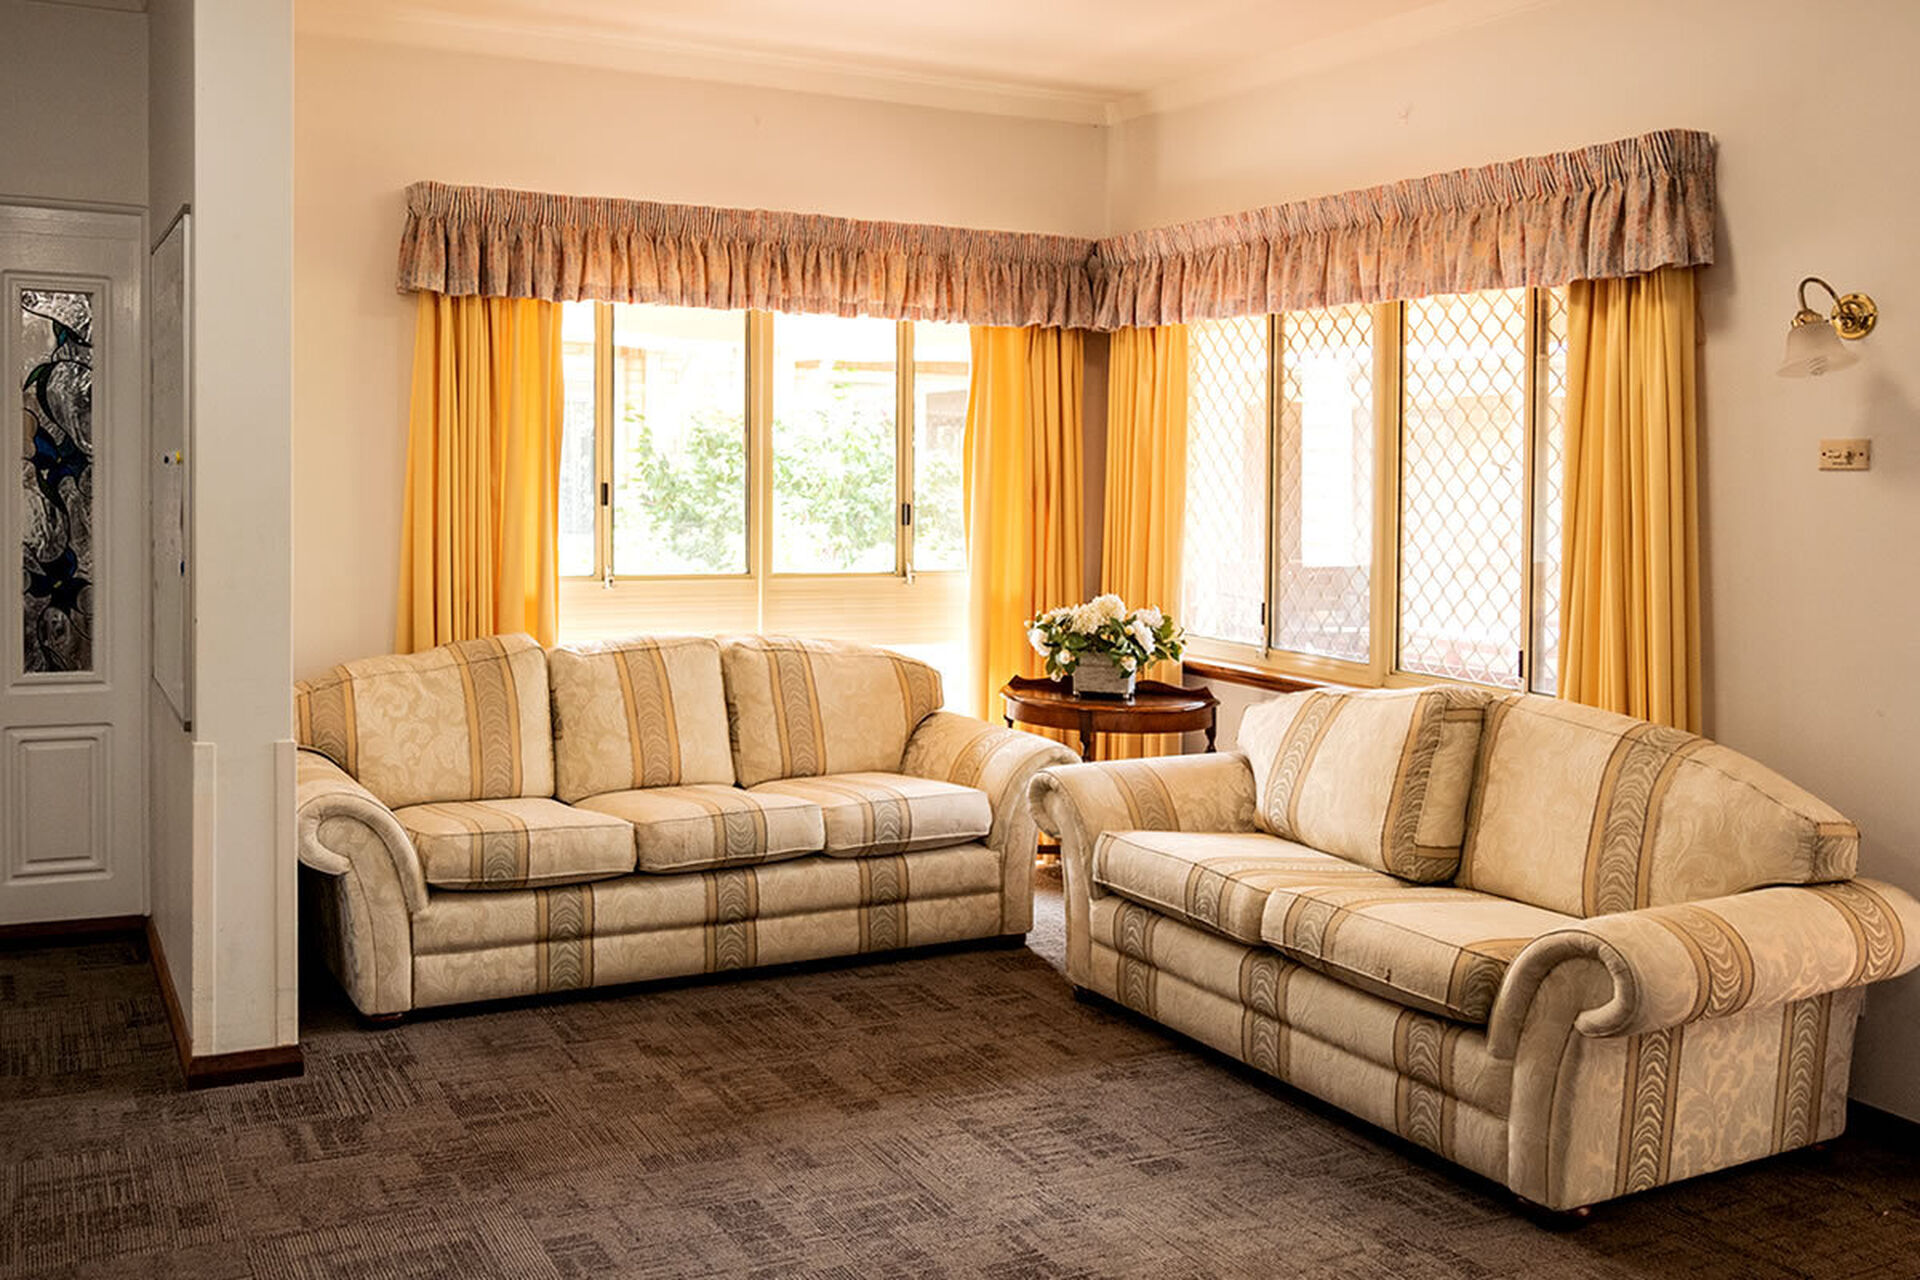 spacious sitting area for nursing home residents at baptistcare morrison gardens aged care home in midland wa